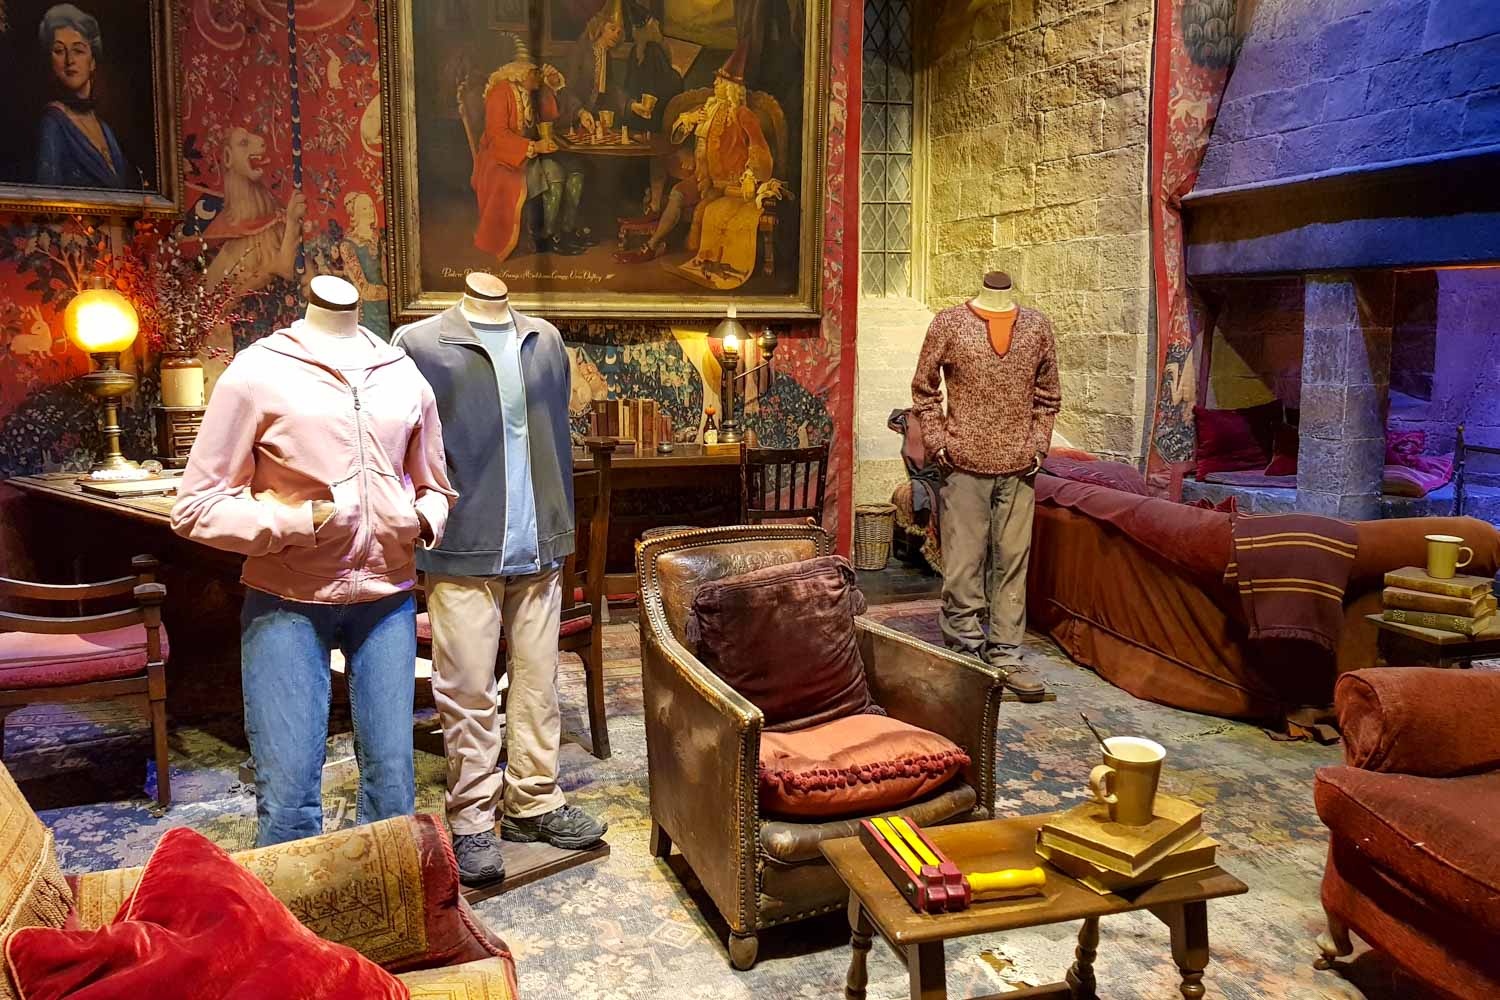 The Gryffindor common room set with models dressed in outfits for Hermione, Harry and Ron at the Warner Bros Studio tour in Leavesden - my tips for Harry Potter Studio tour, London